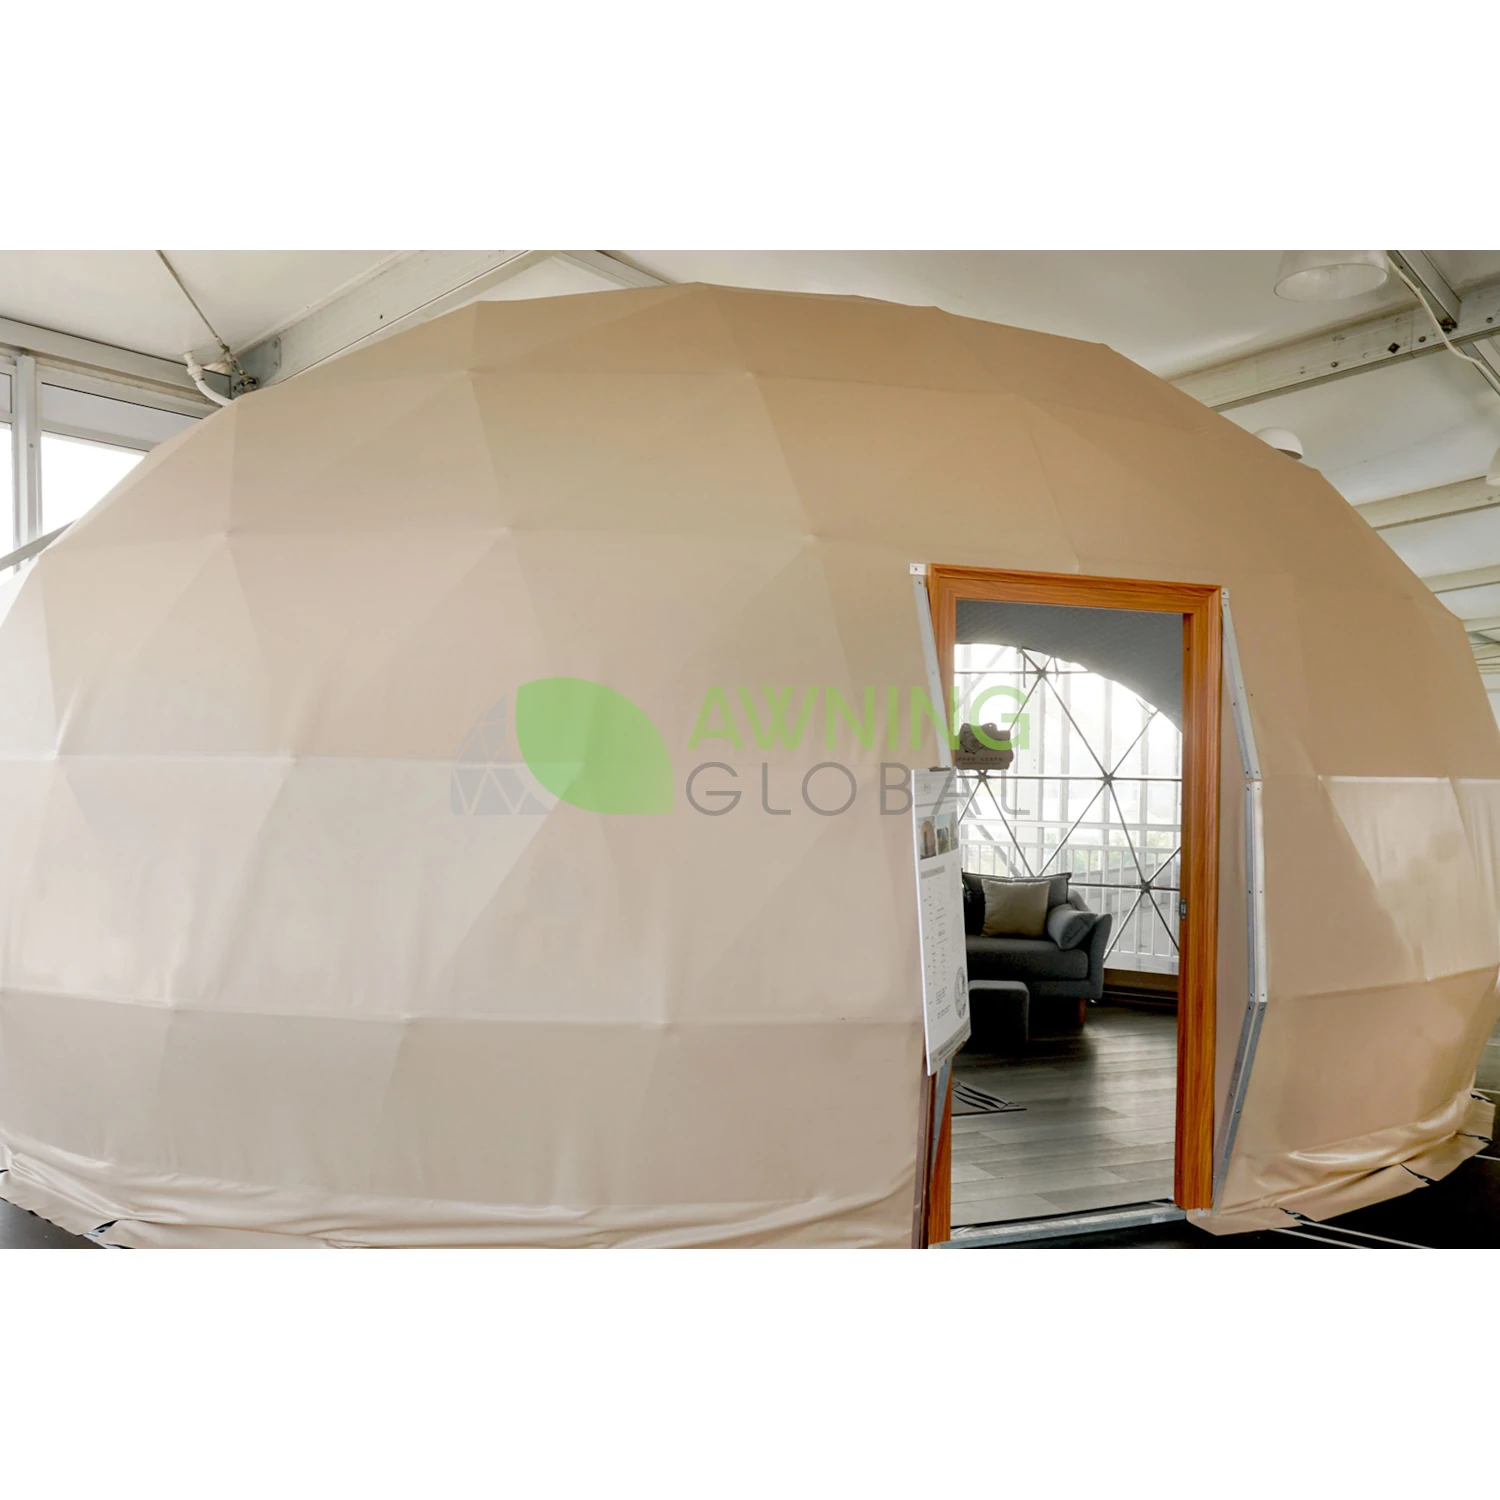 Glamping-dome-tent-oval-shape (4)